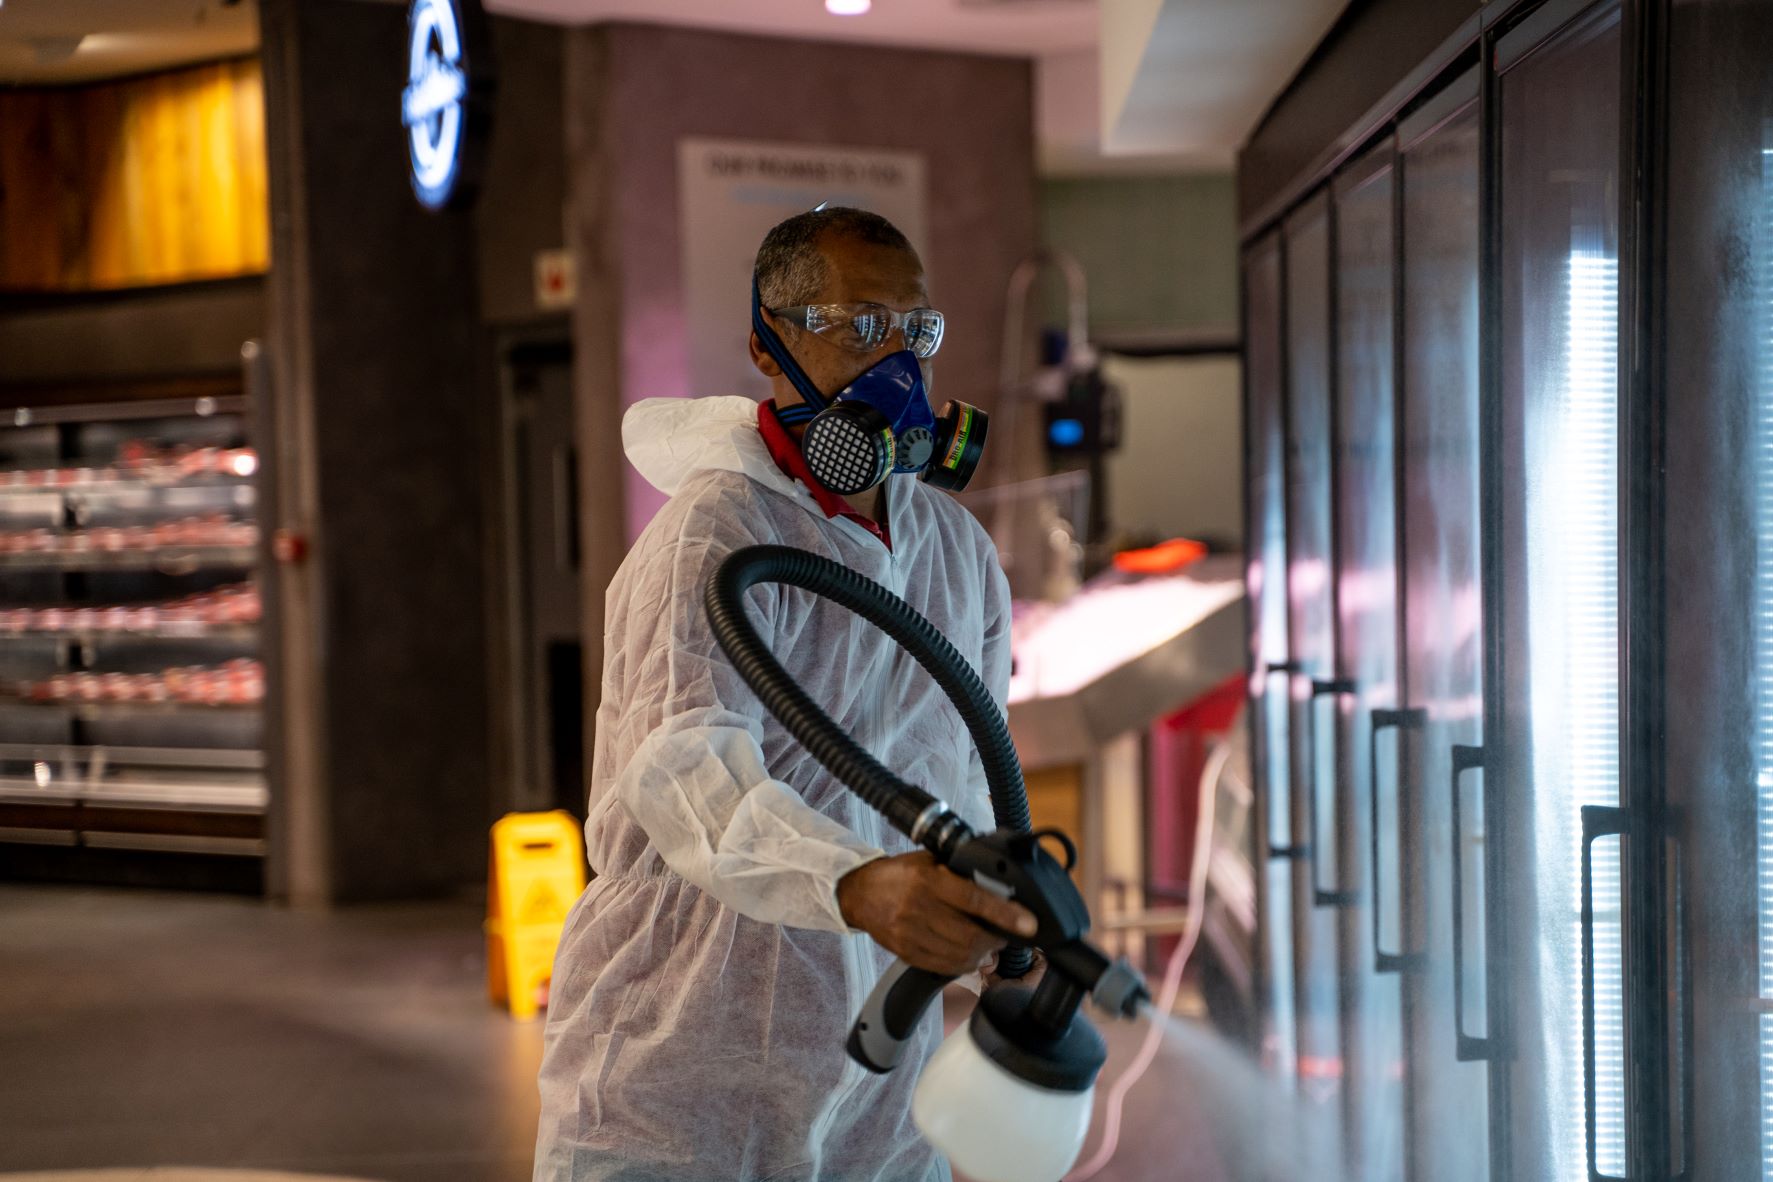 Cleaning operative in personal protective equipment is using a fogger to disinfect surfaces